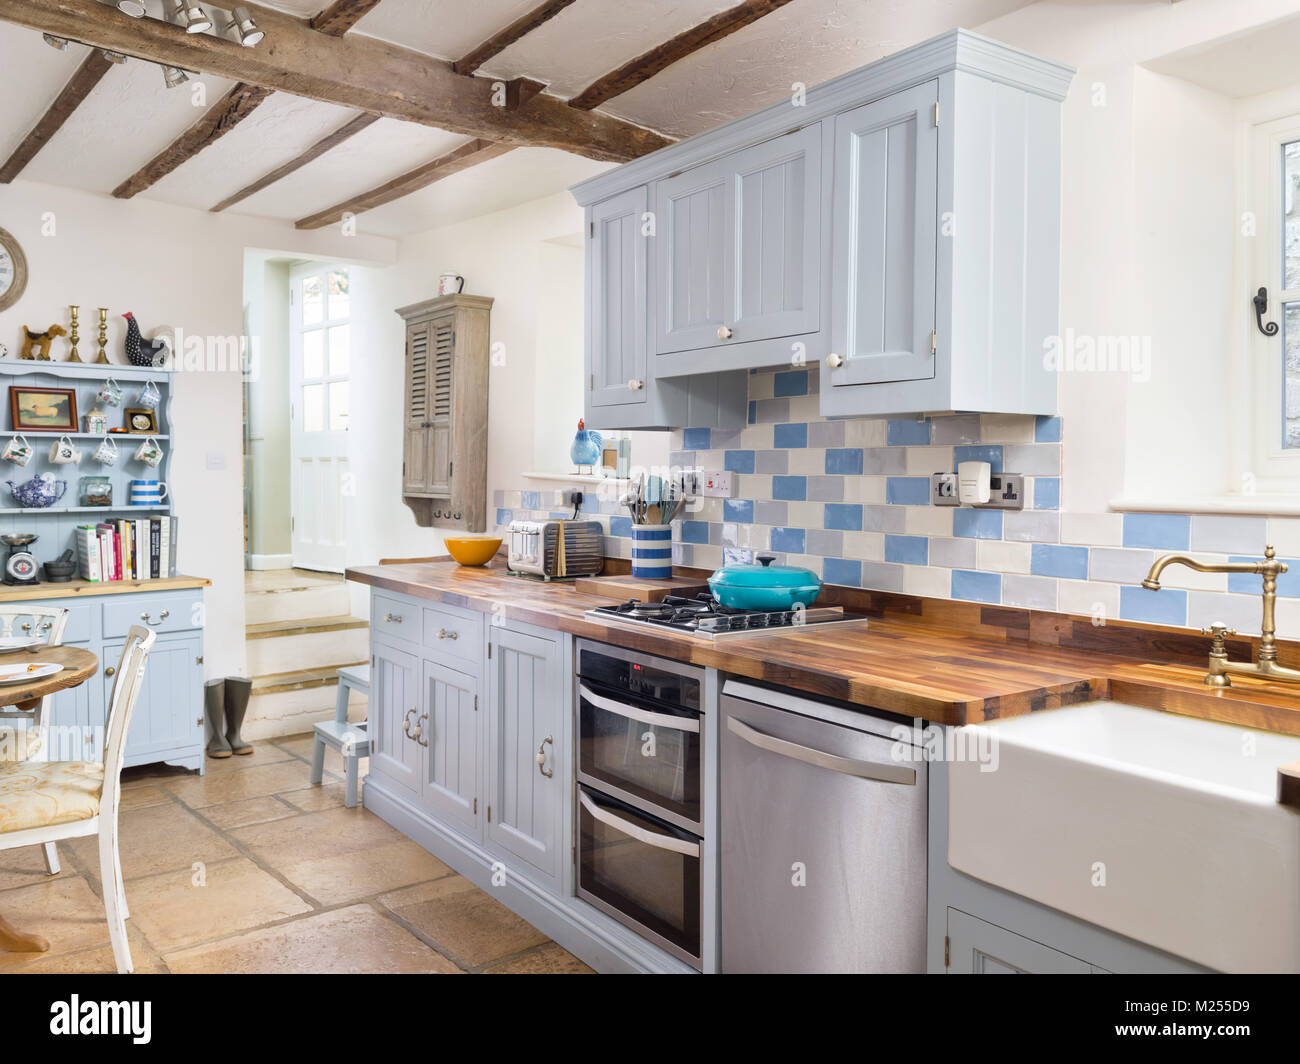 A country kitchen in a traditional English cottage home. Stock Photo